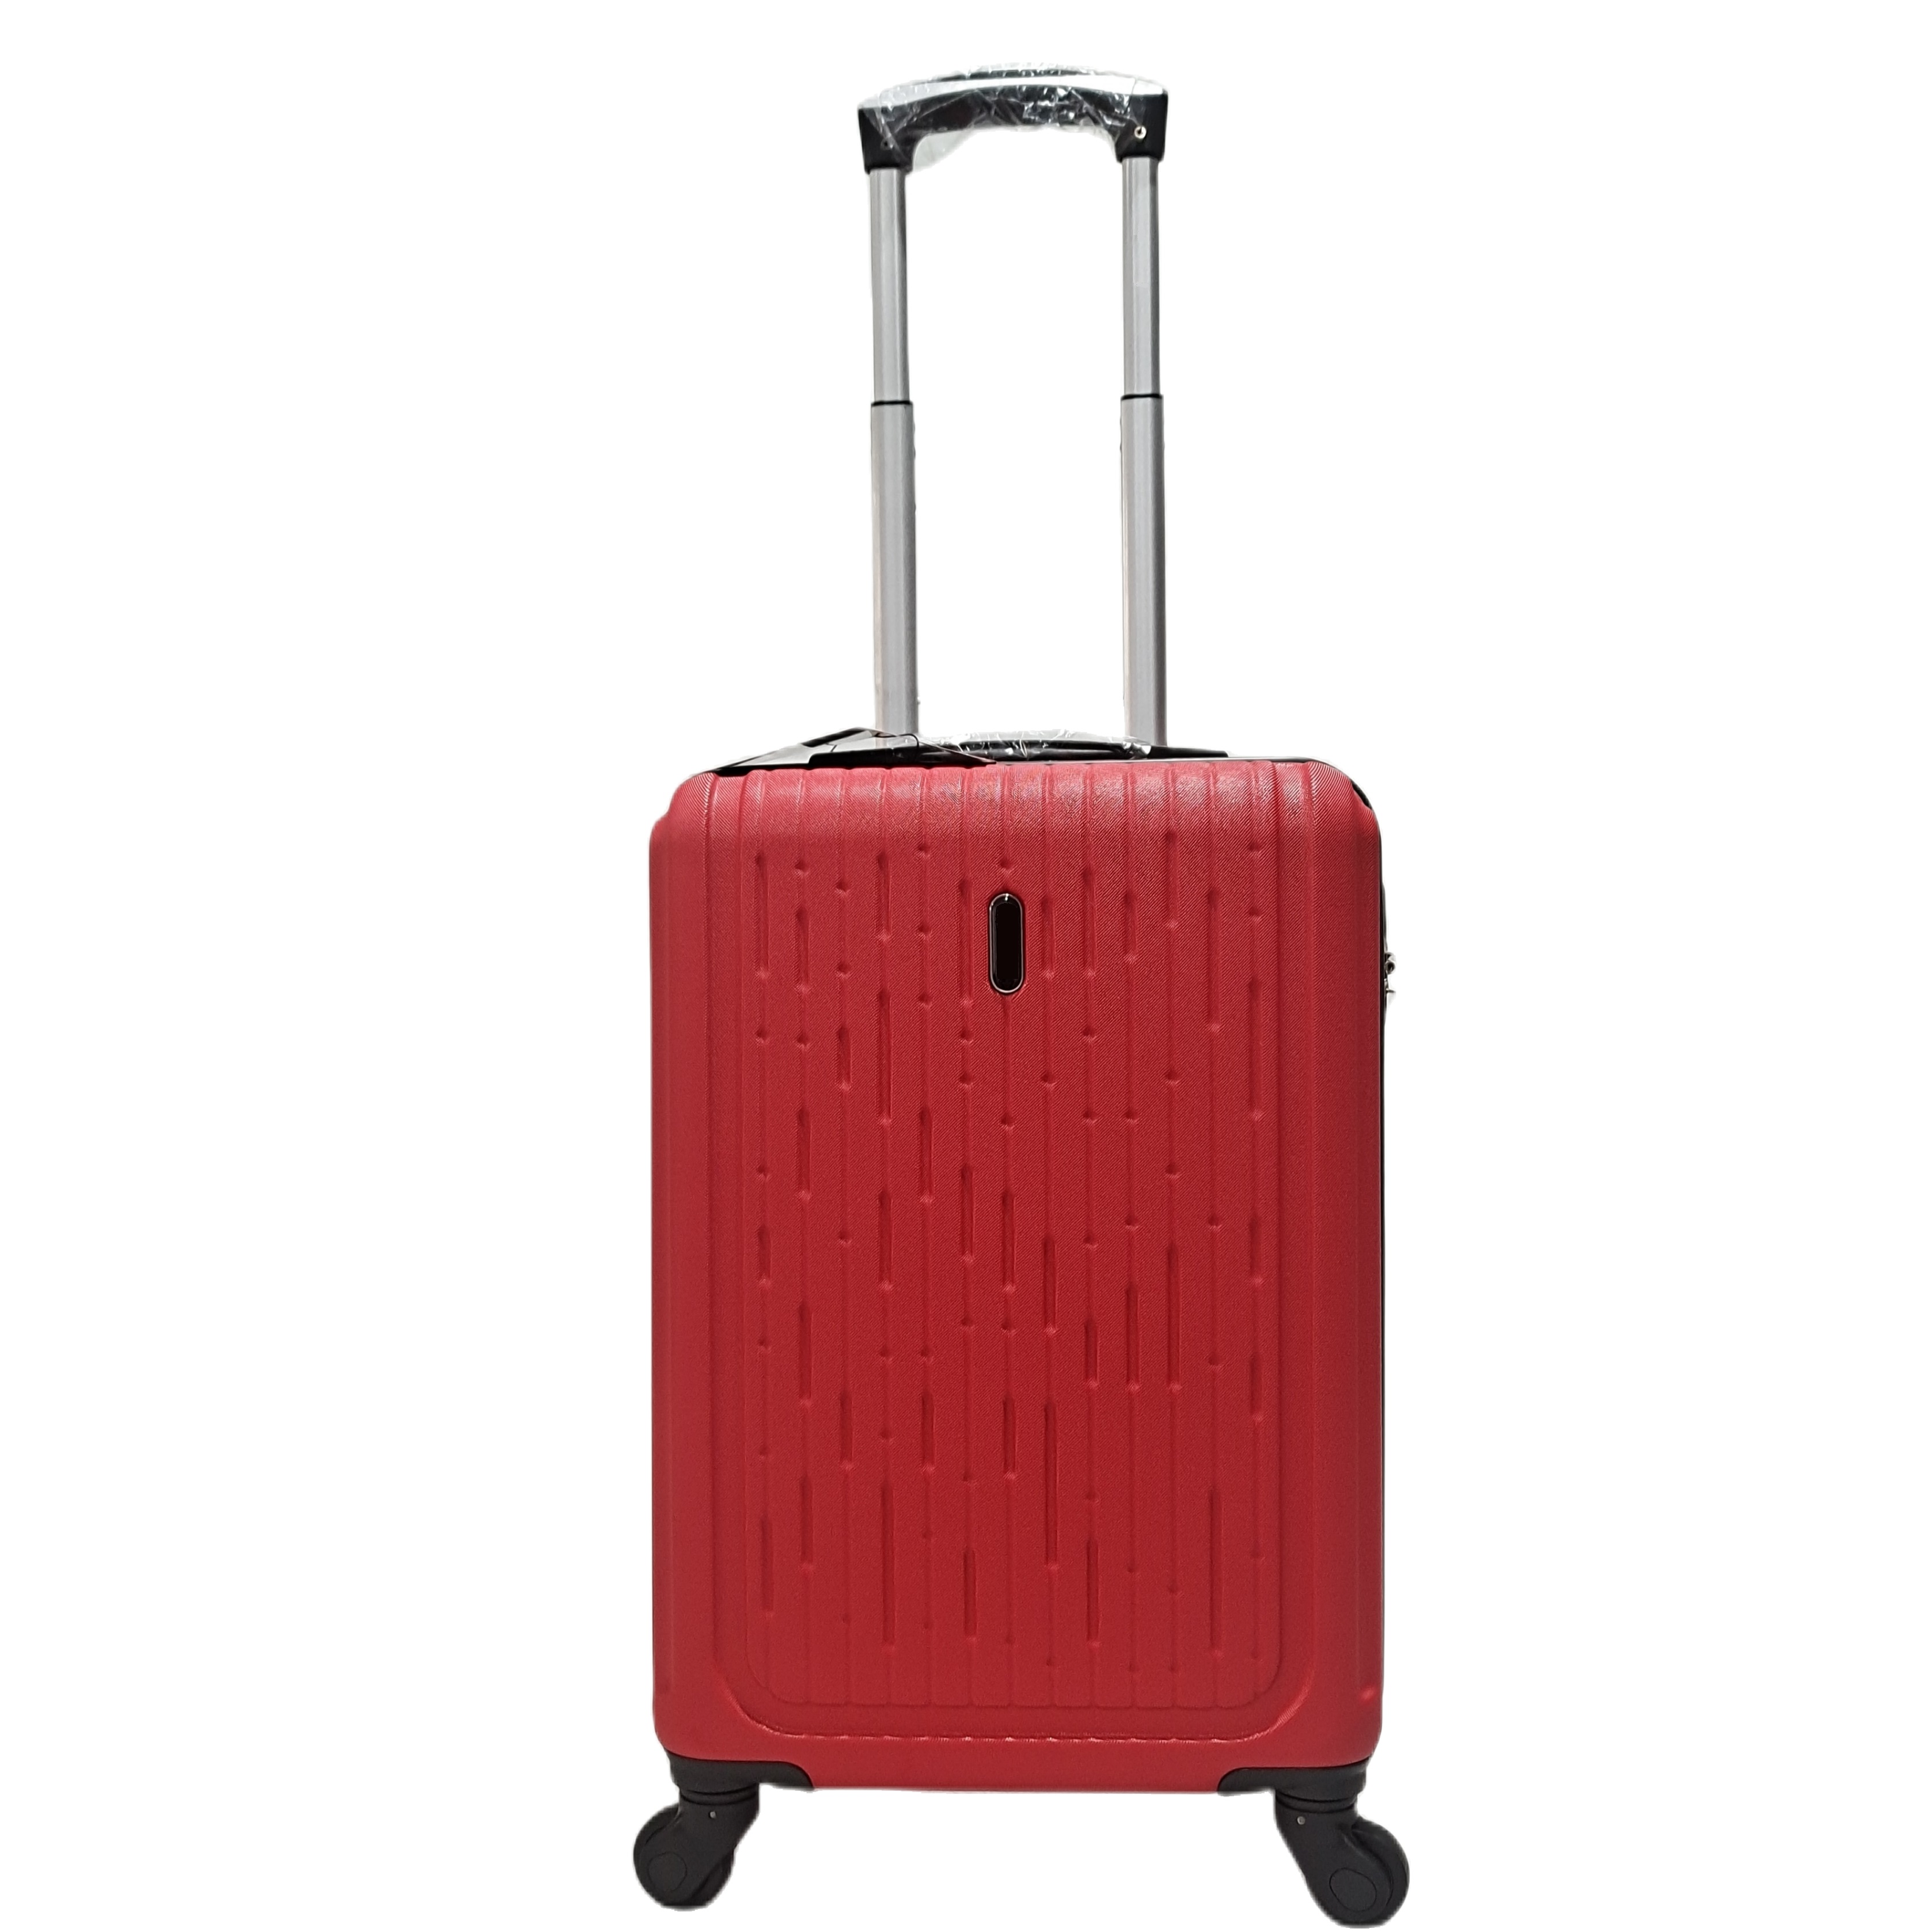  ABS Travel Style Suitcase 360 Degree Wheeled Trolley Traveling Bag Luggage